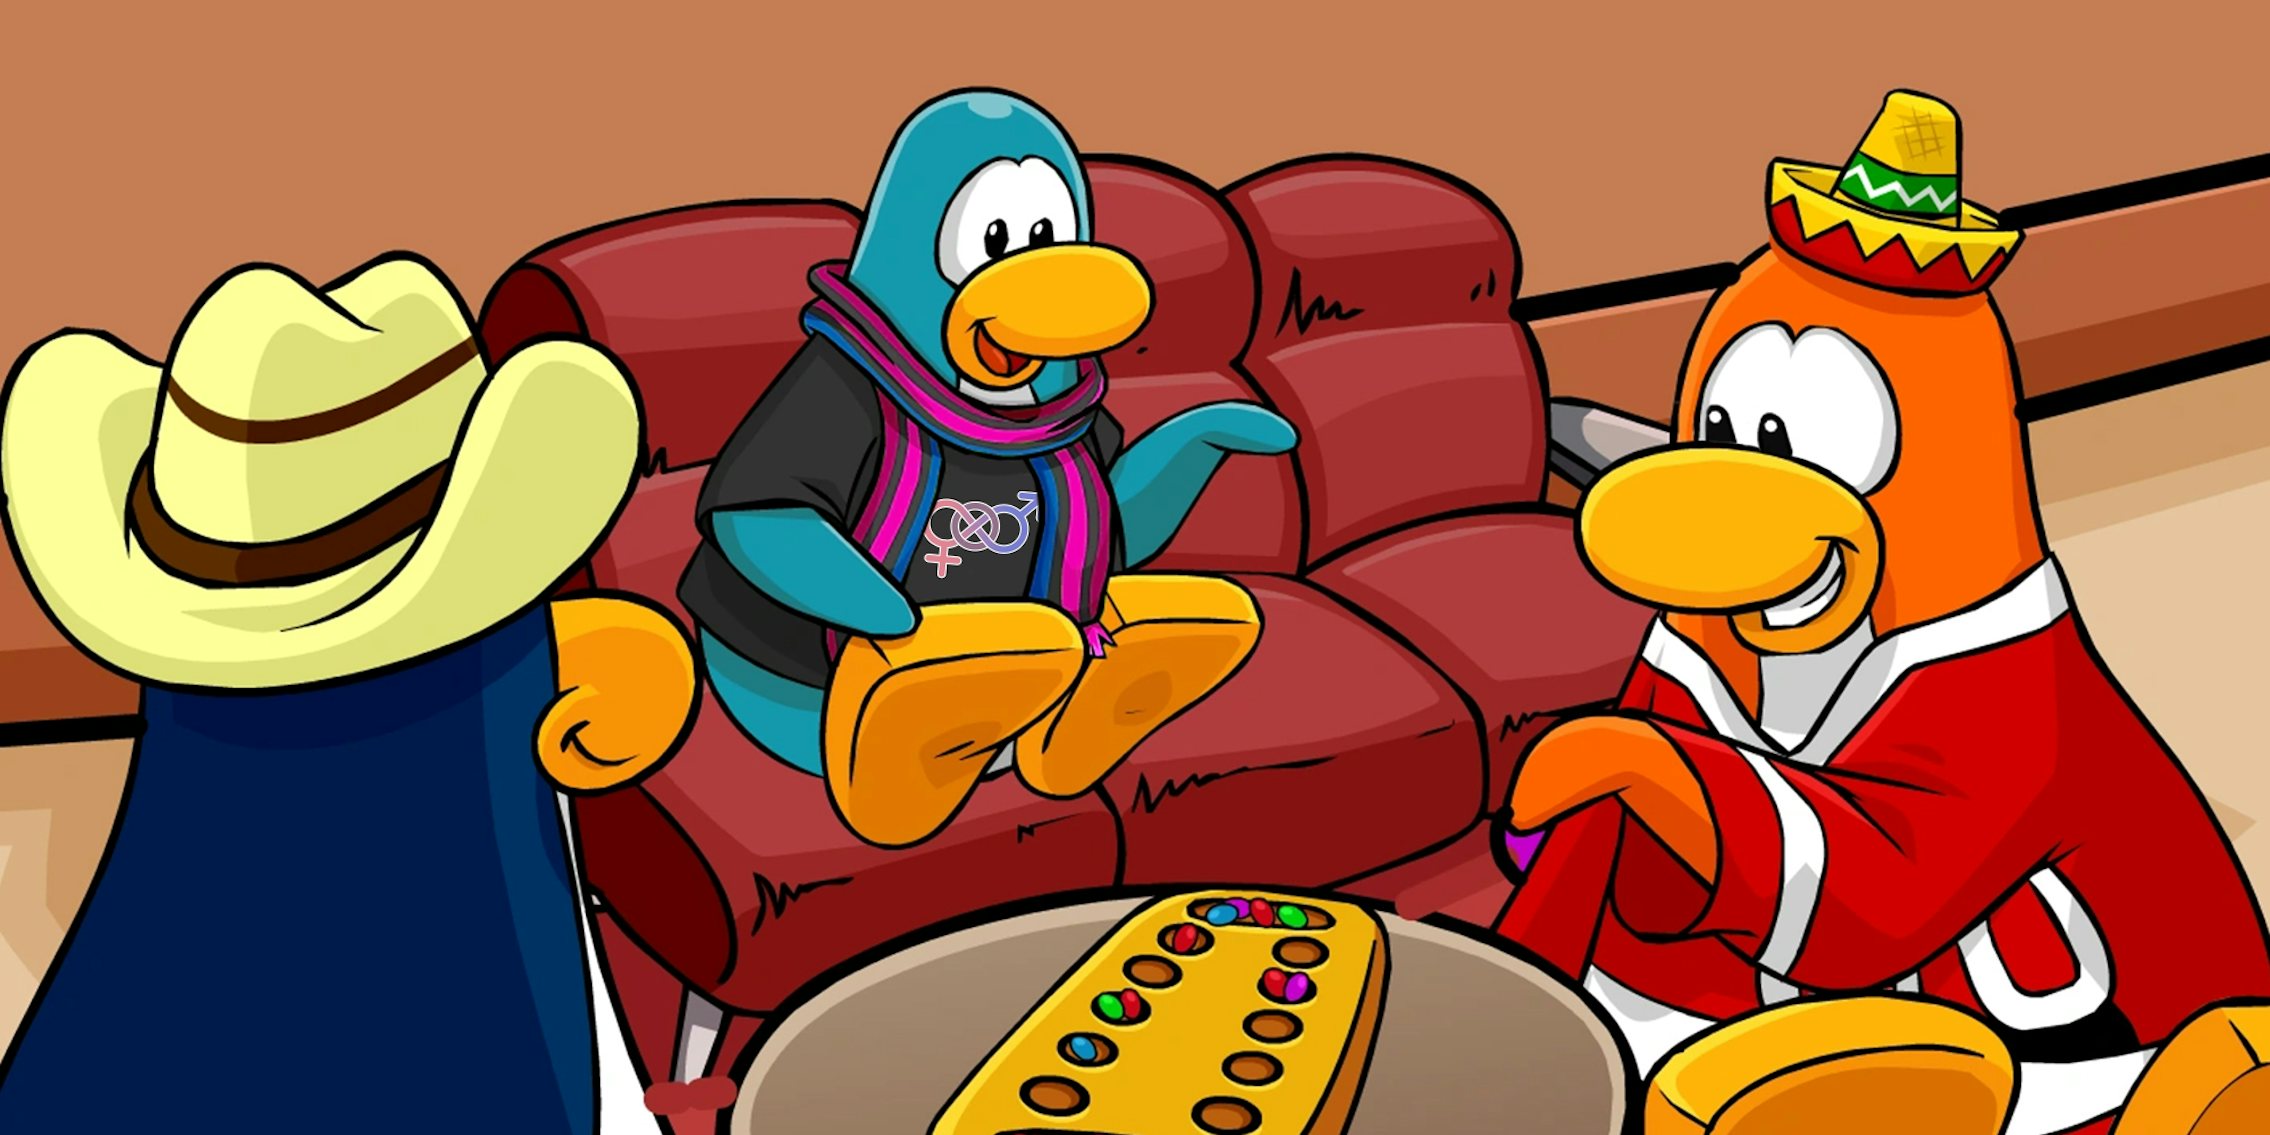 From Club Penguin to Roblox, LGBTQ Youth Flock to Game Sites